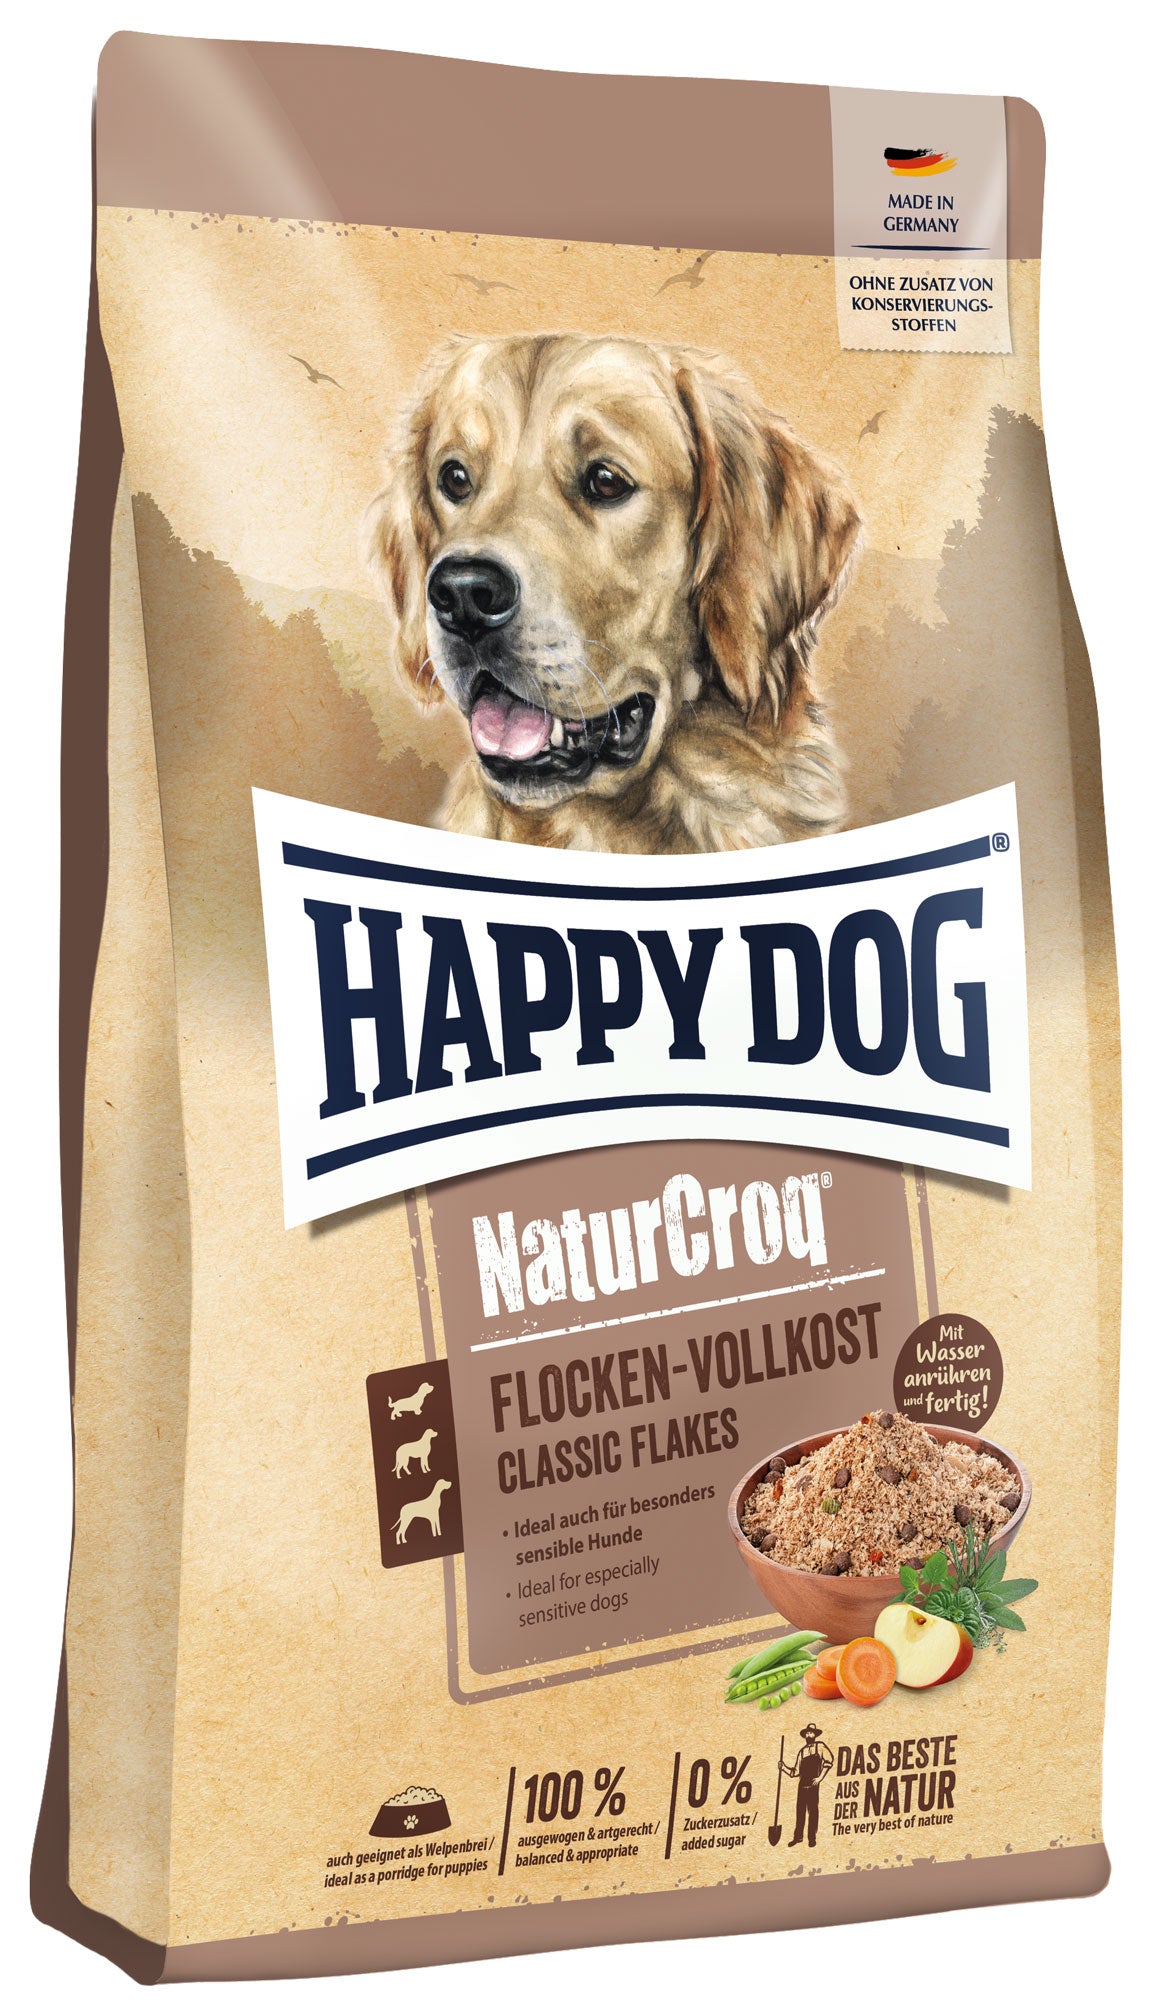 Dog Food Flakes - Flocken Vollkost Classic Flakes